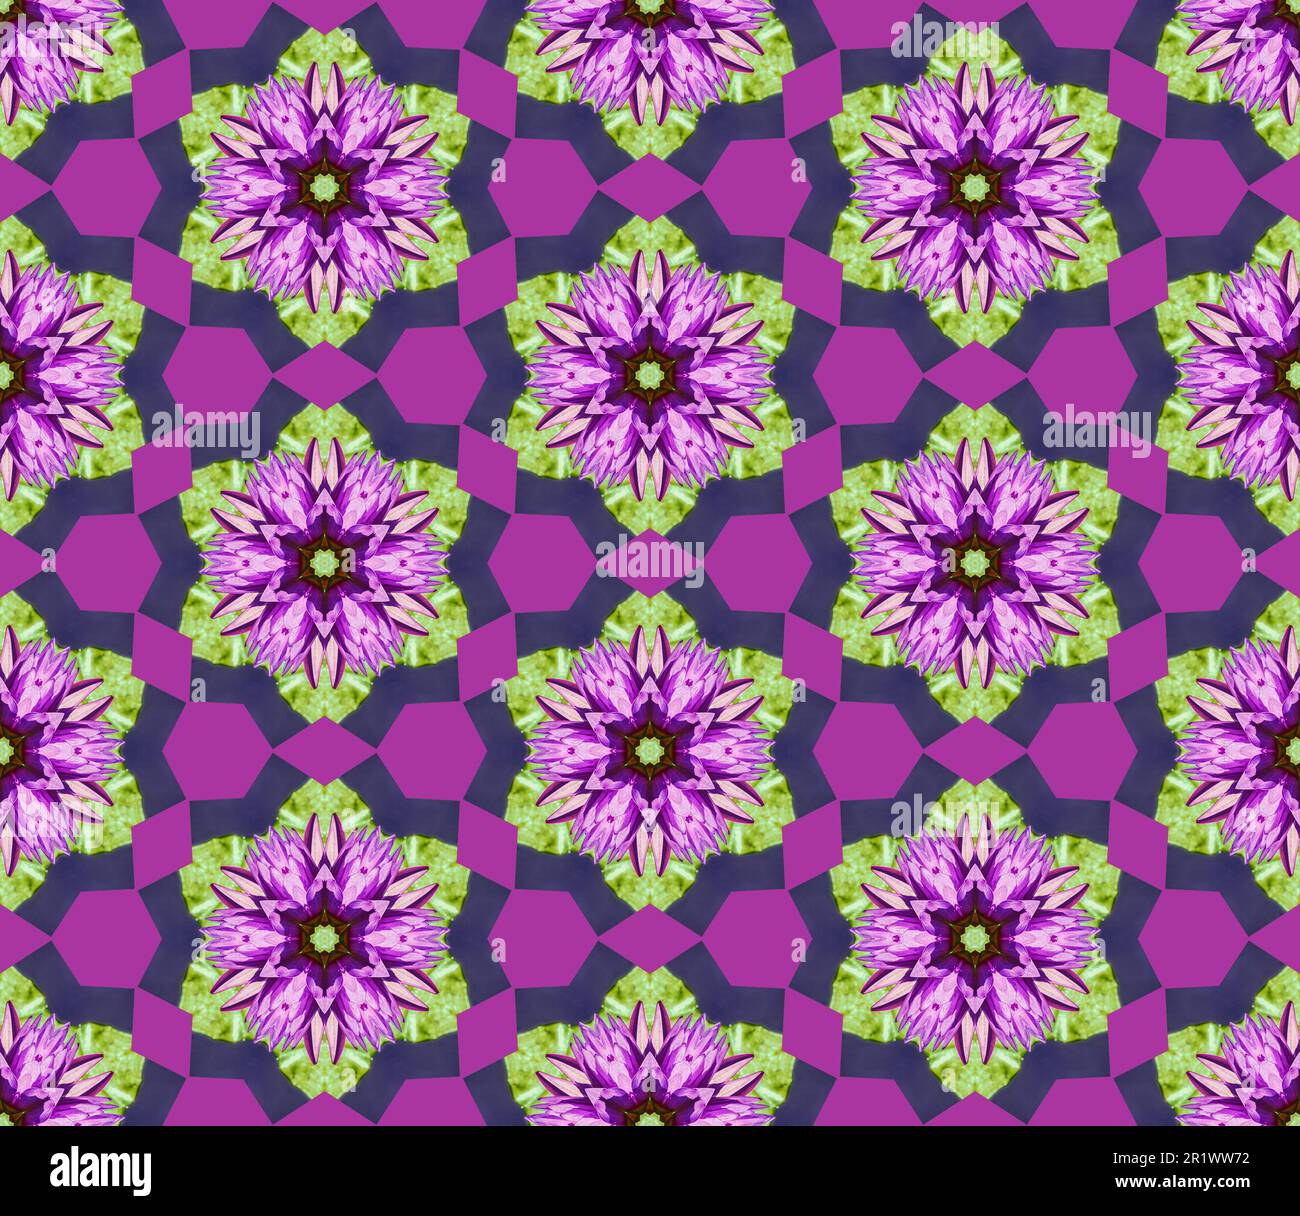 Pink, purple, green digital art spring summer floral pattern abstract background. Seamless repeating pattern for mobile wallpaper background other designs Stock Photo